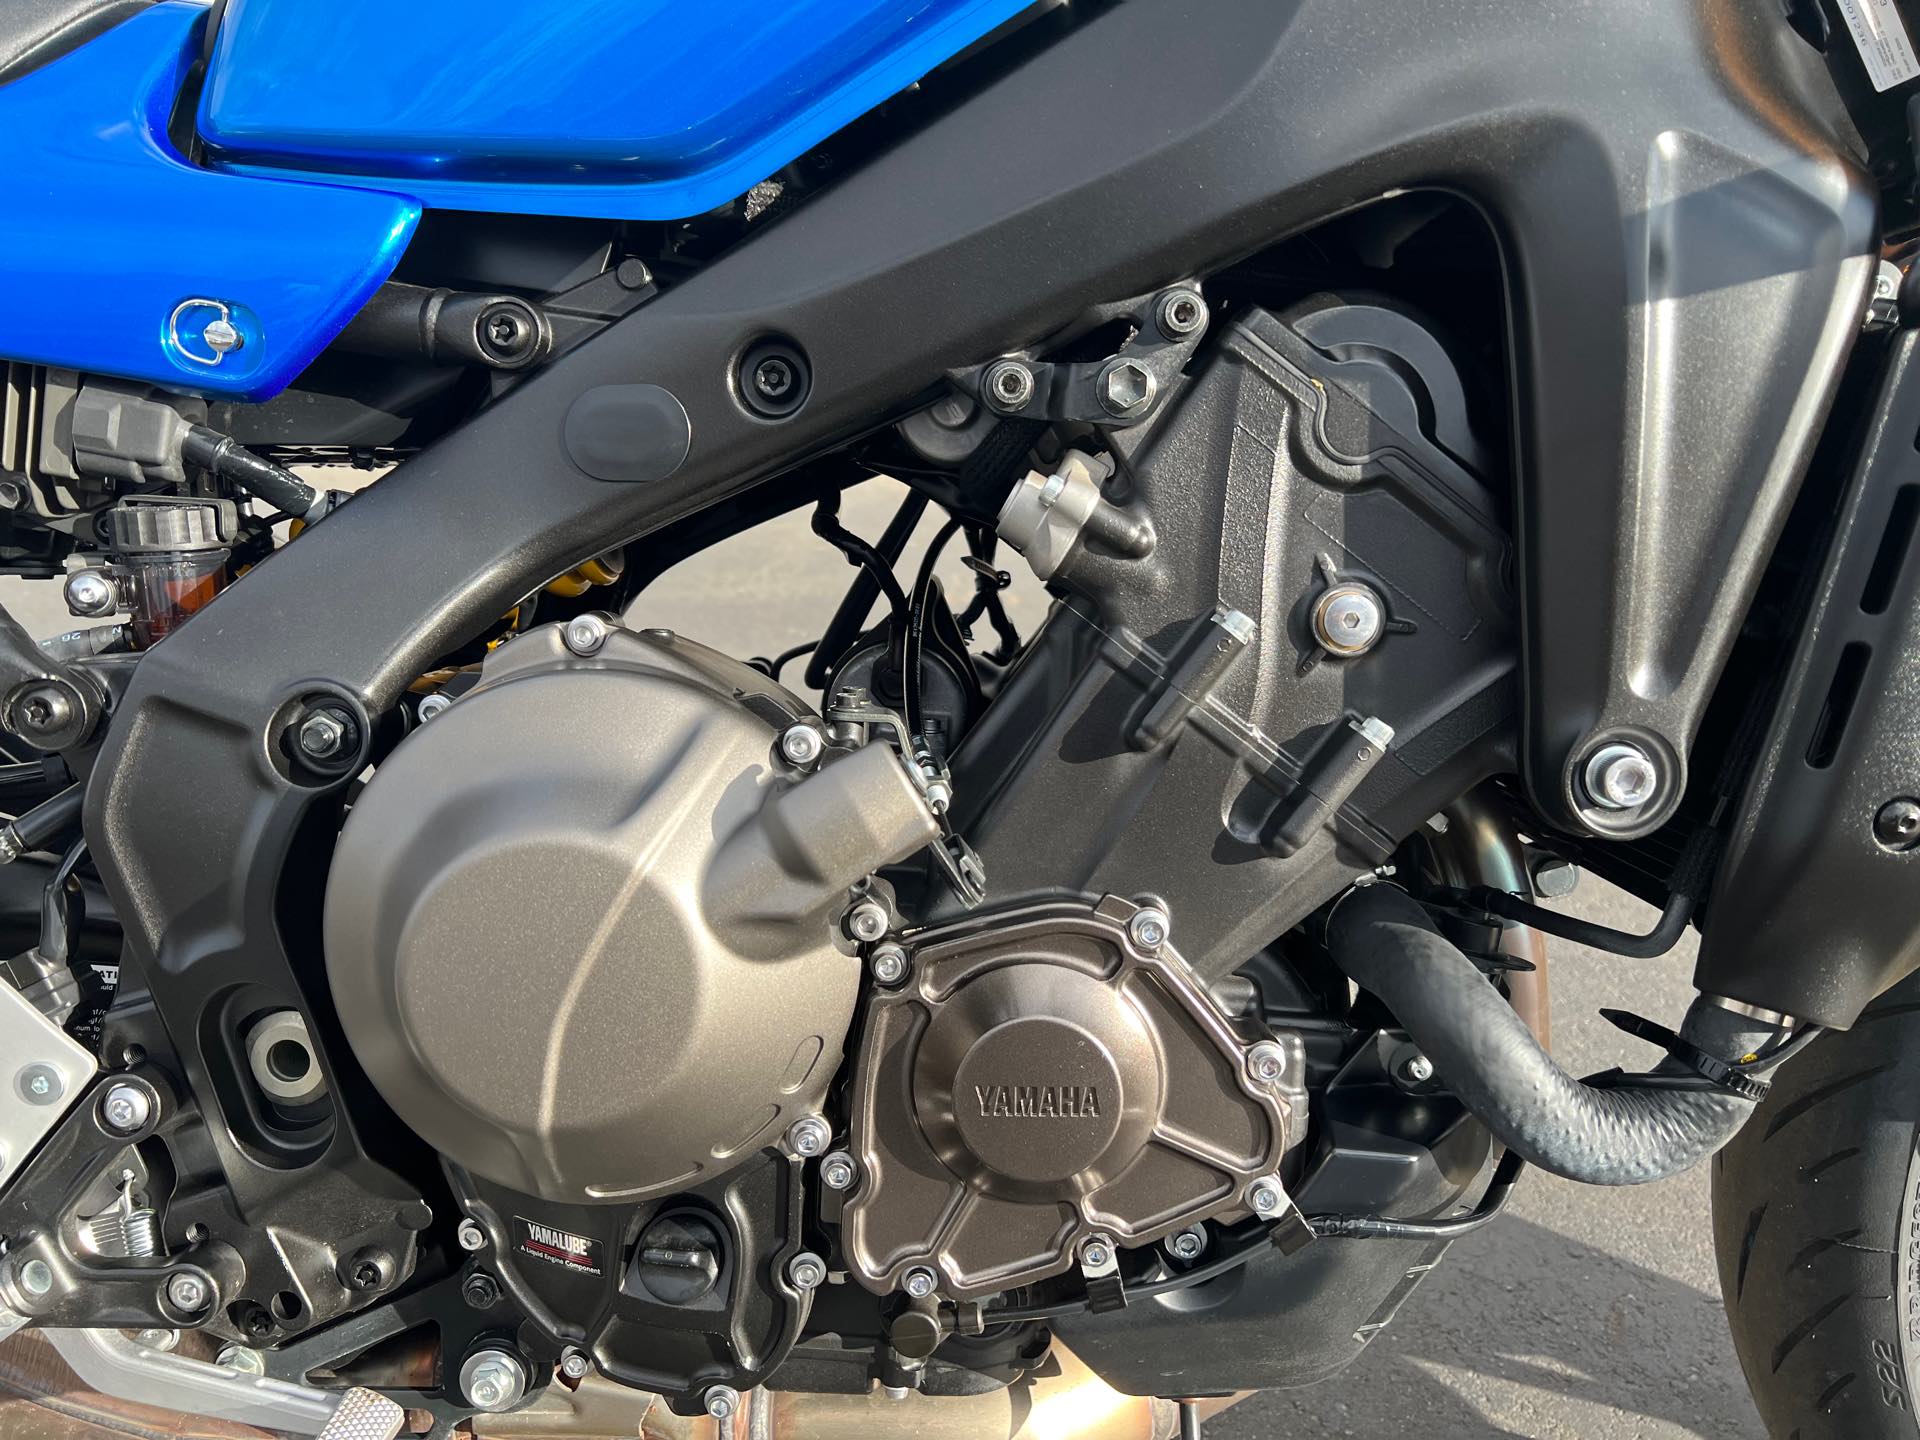 2023 Yamaha XSR 900 at Aces Motorcycles - Fort Collins